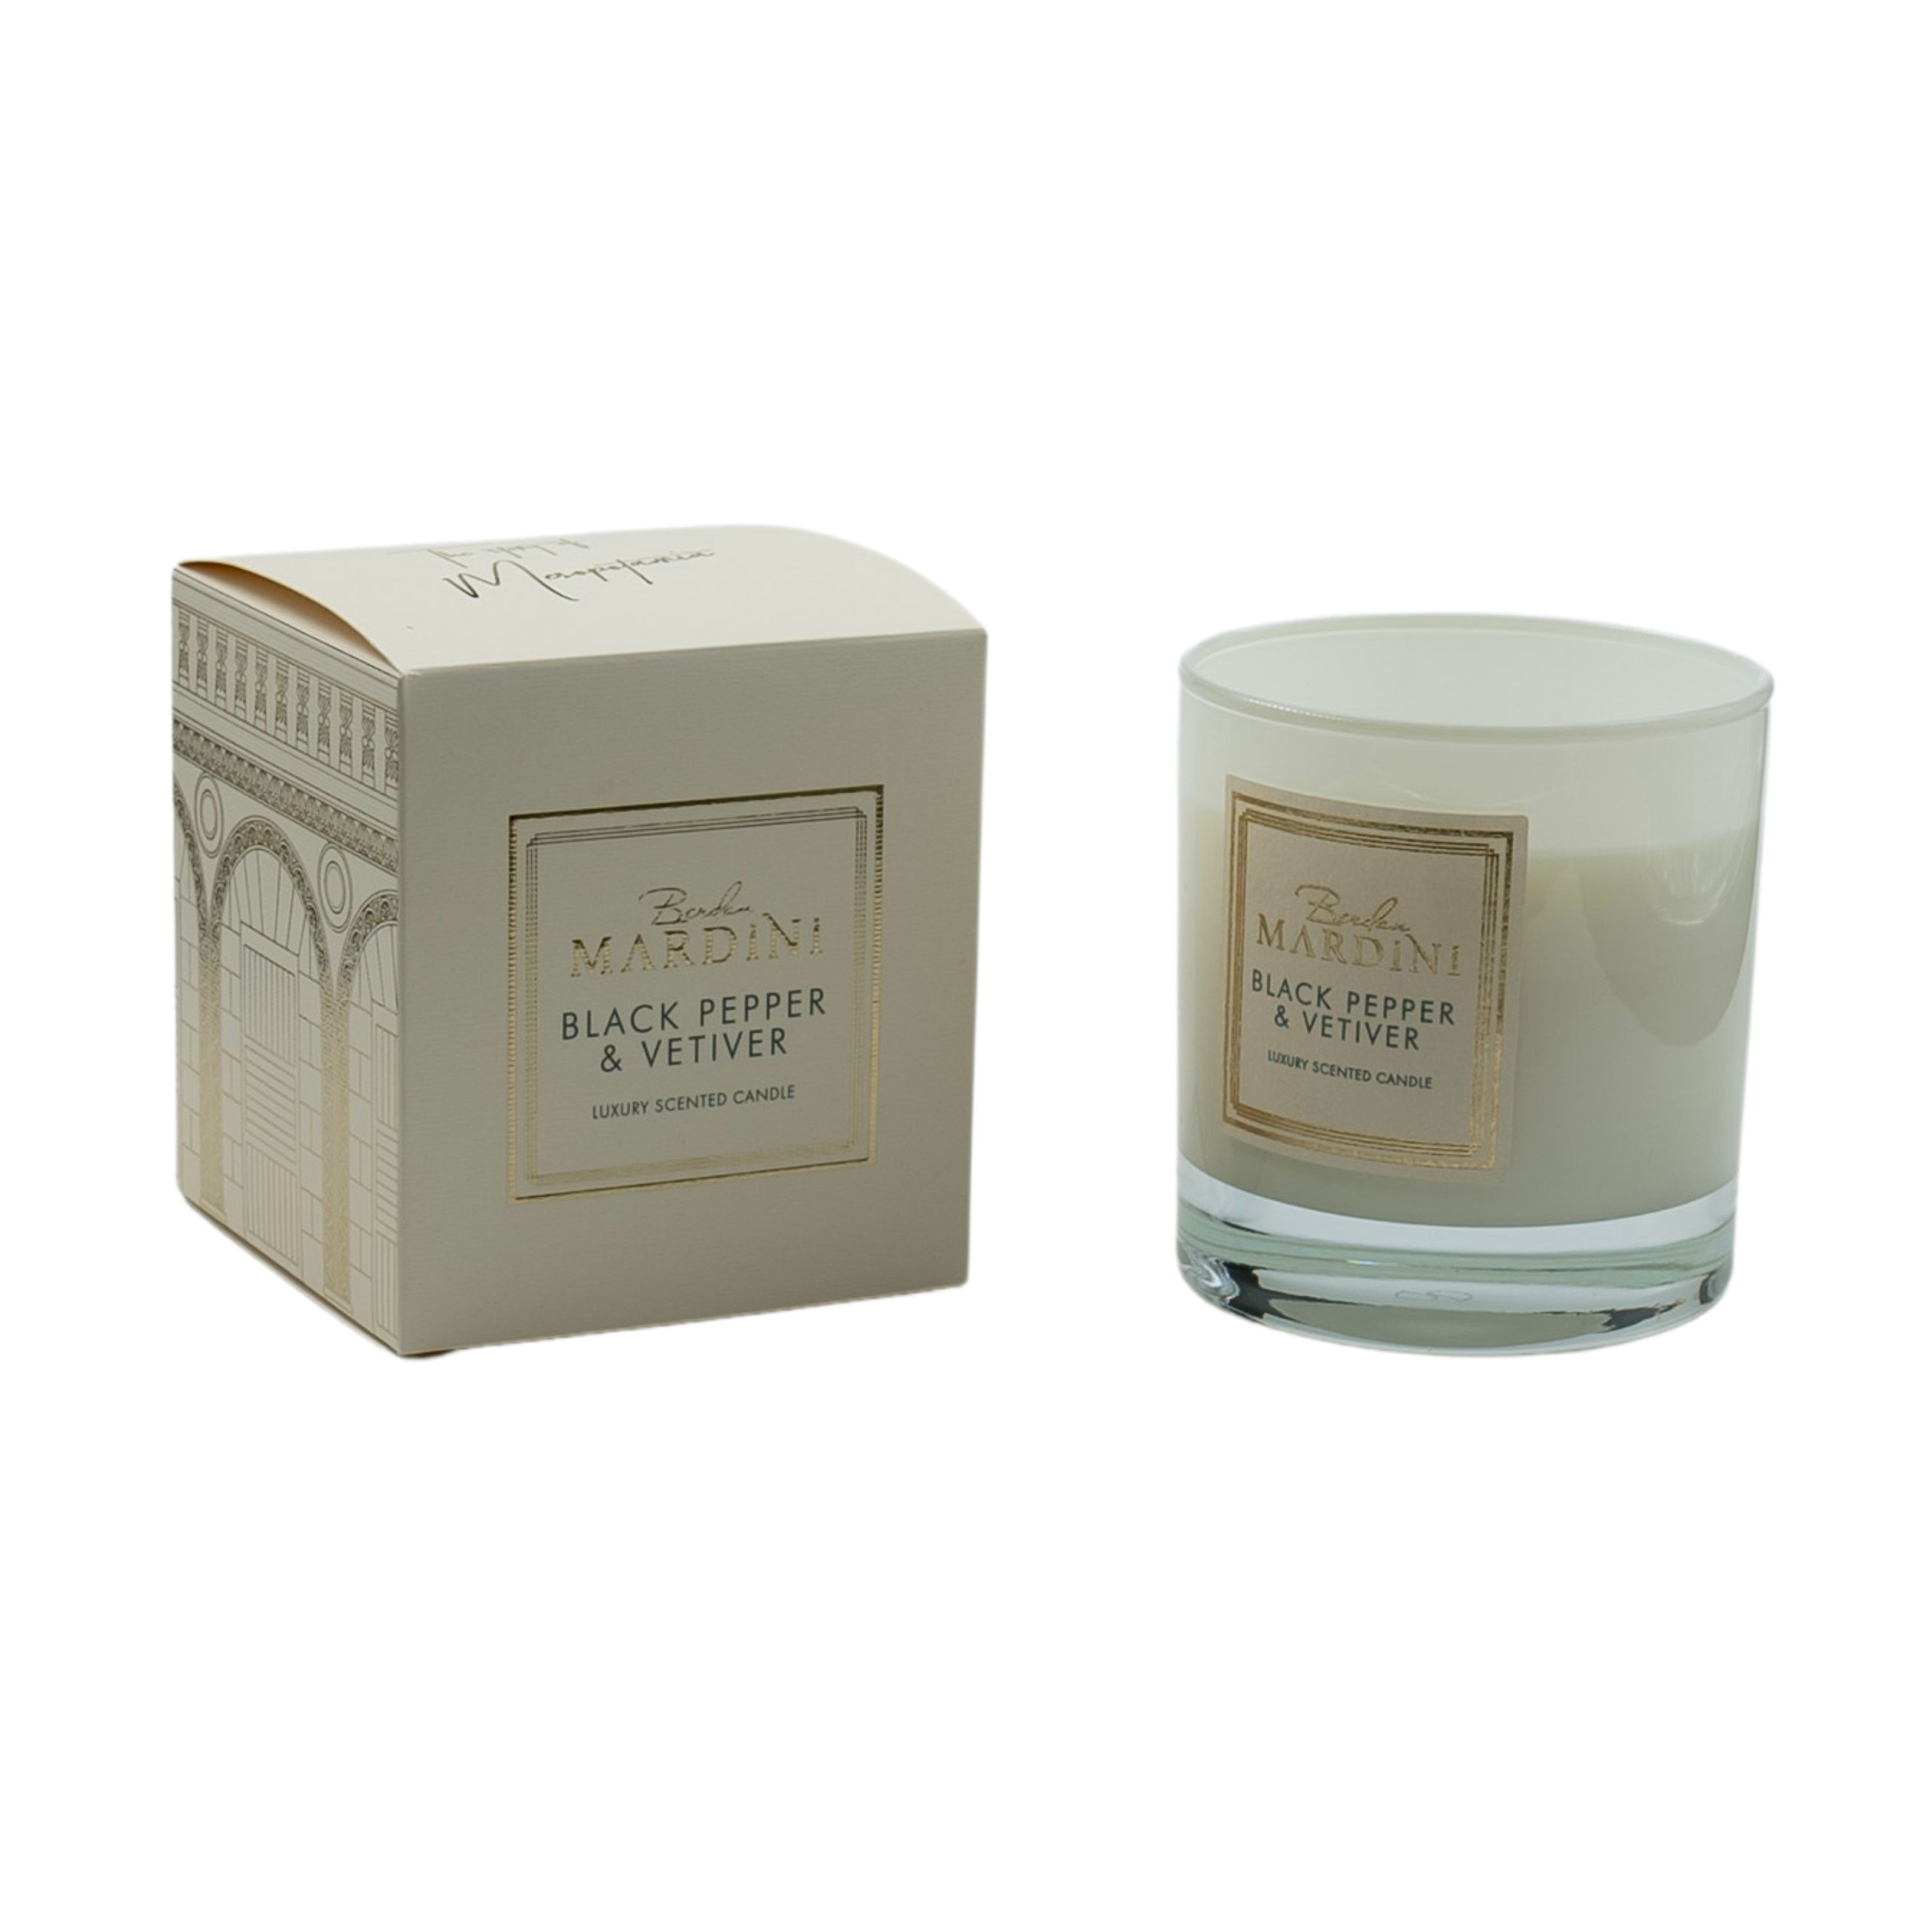 BLACK PEPPER&VETYVER LUXURY SCENTED CANDLE